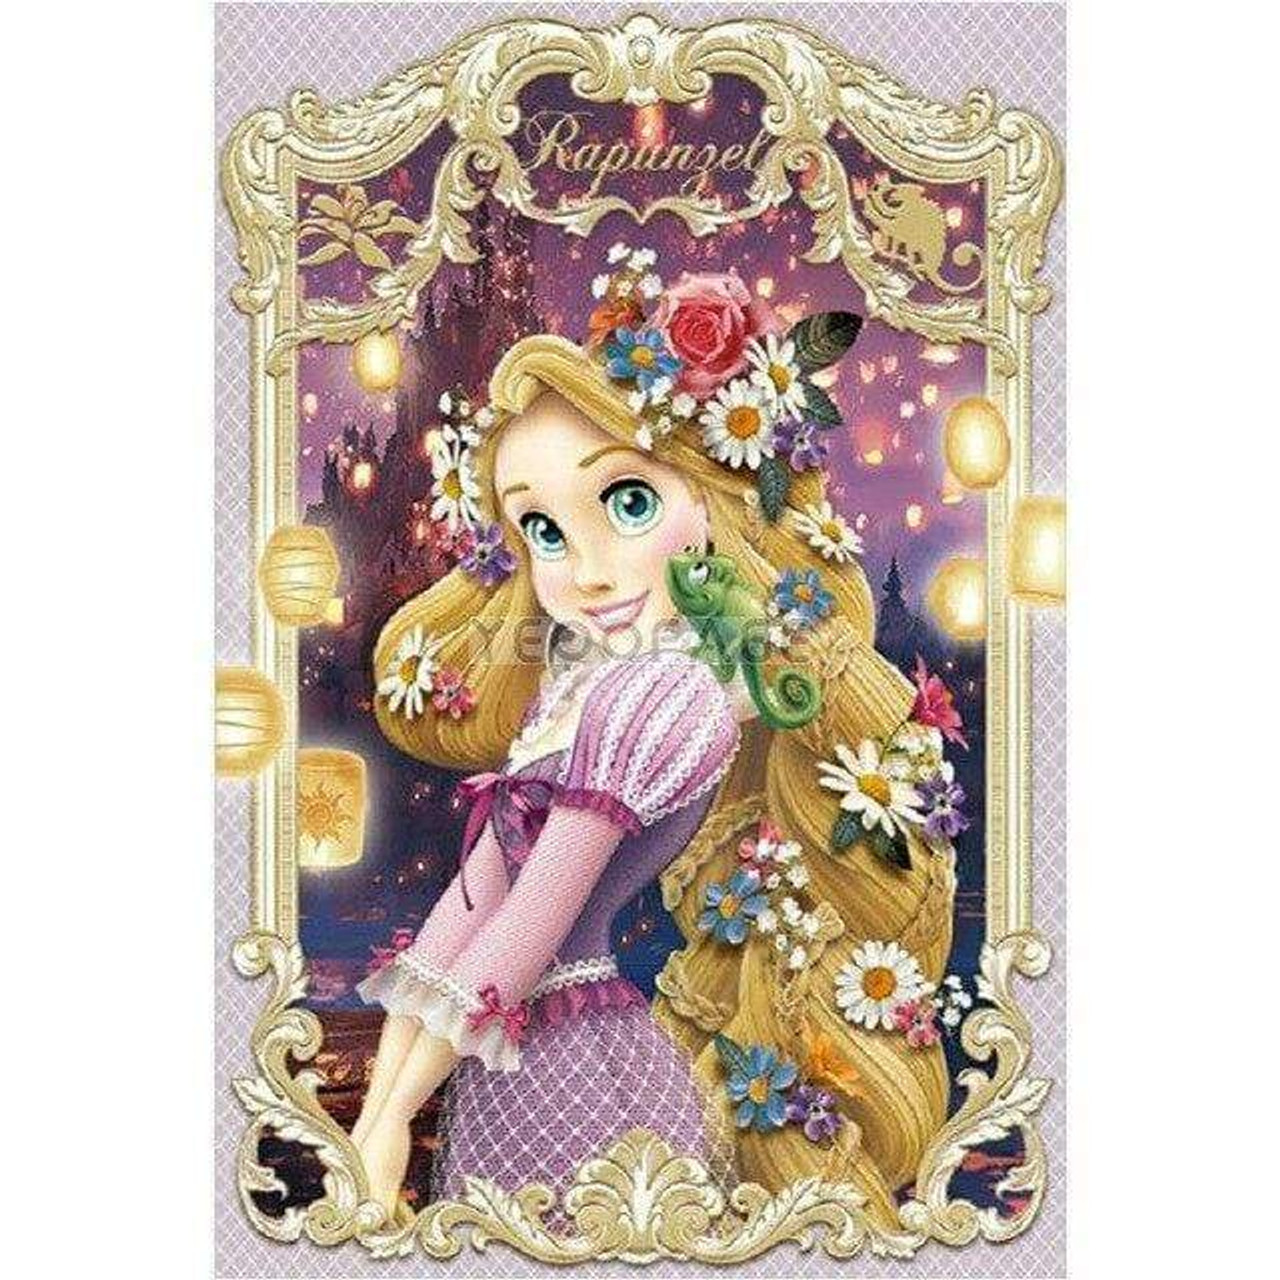 5D Diamond Painting Disney Rapunzel Silhouette with a floating